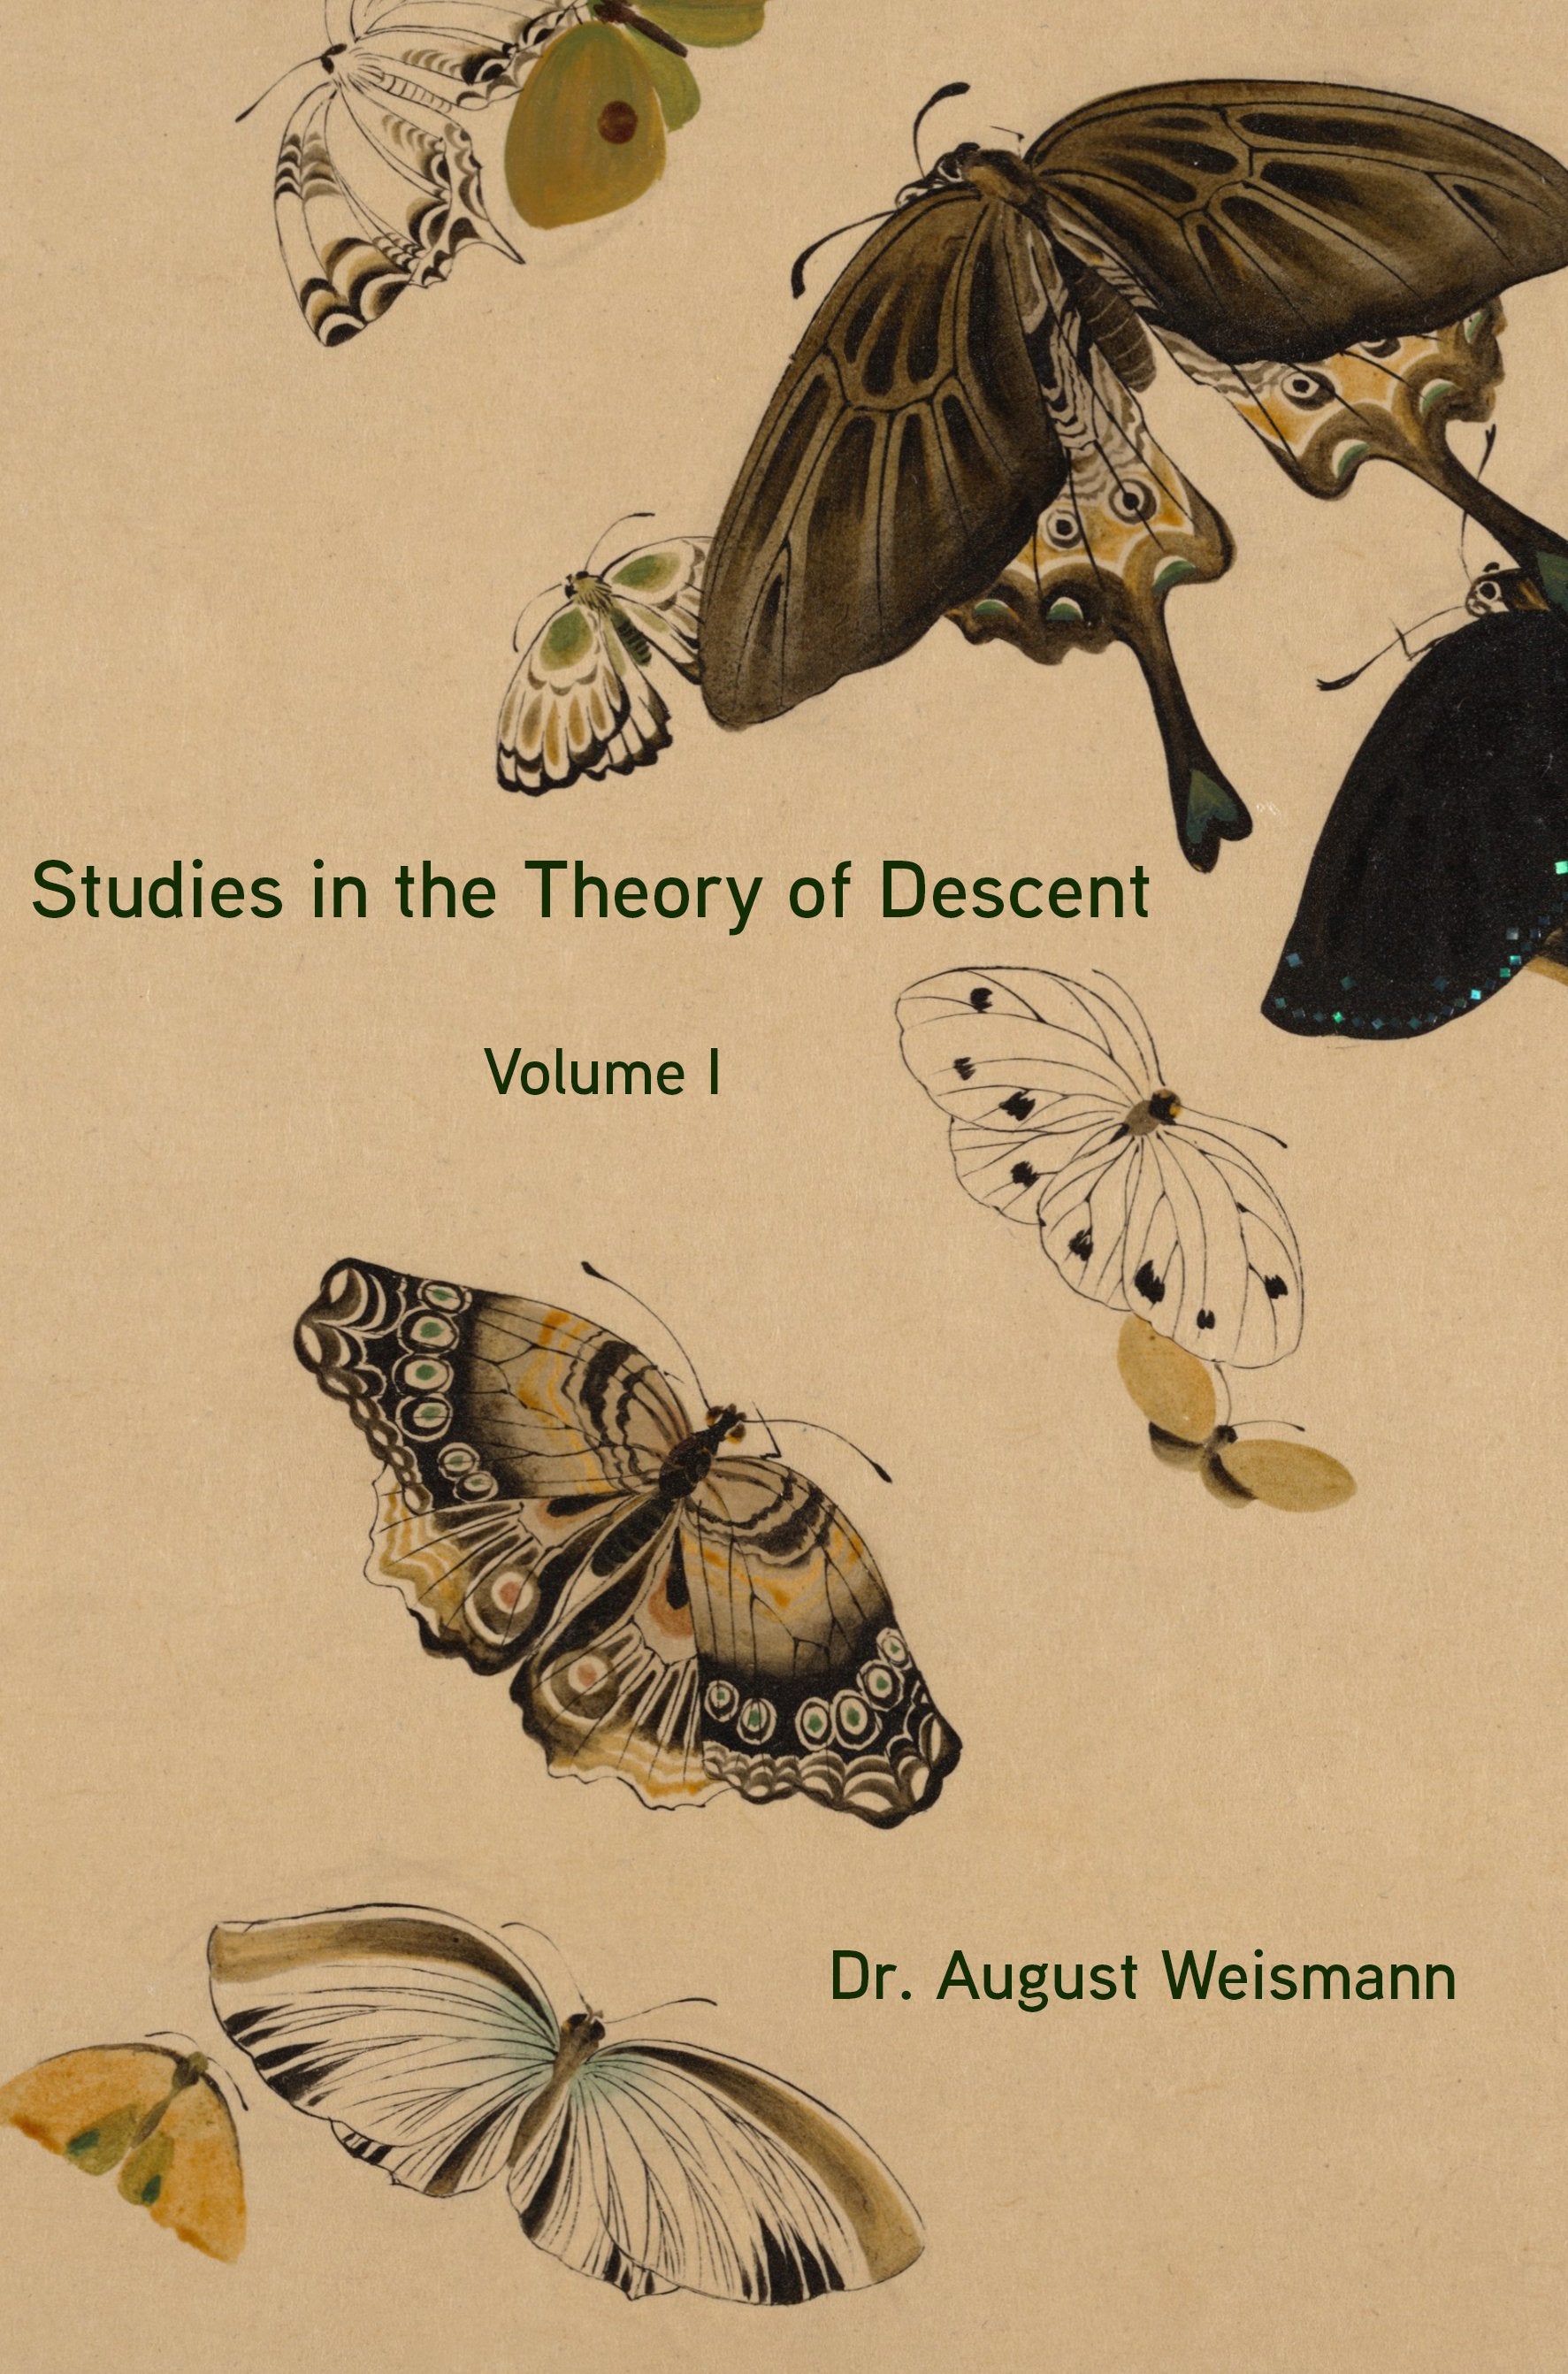 Studies in the Theory of Descent Volume I